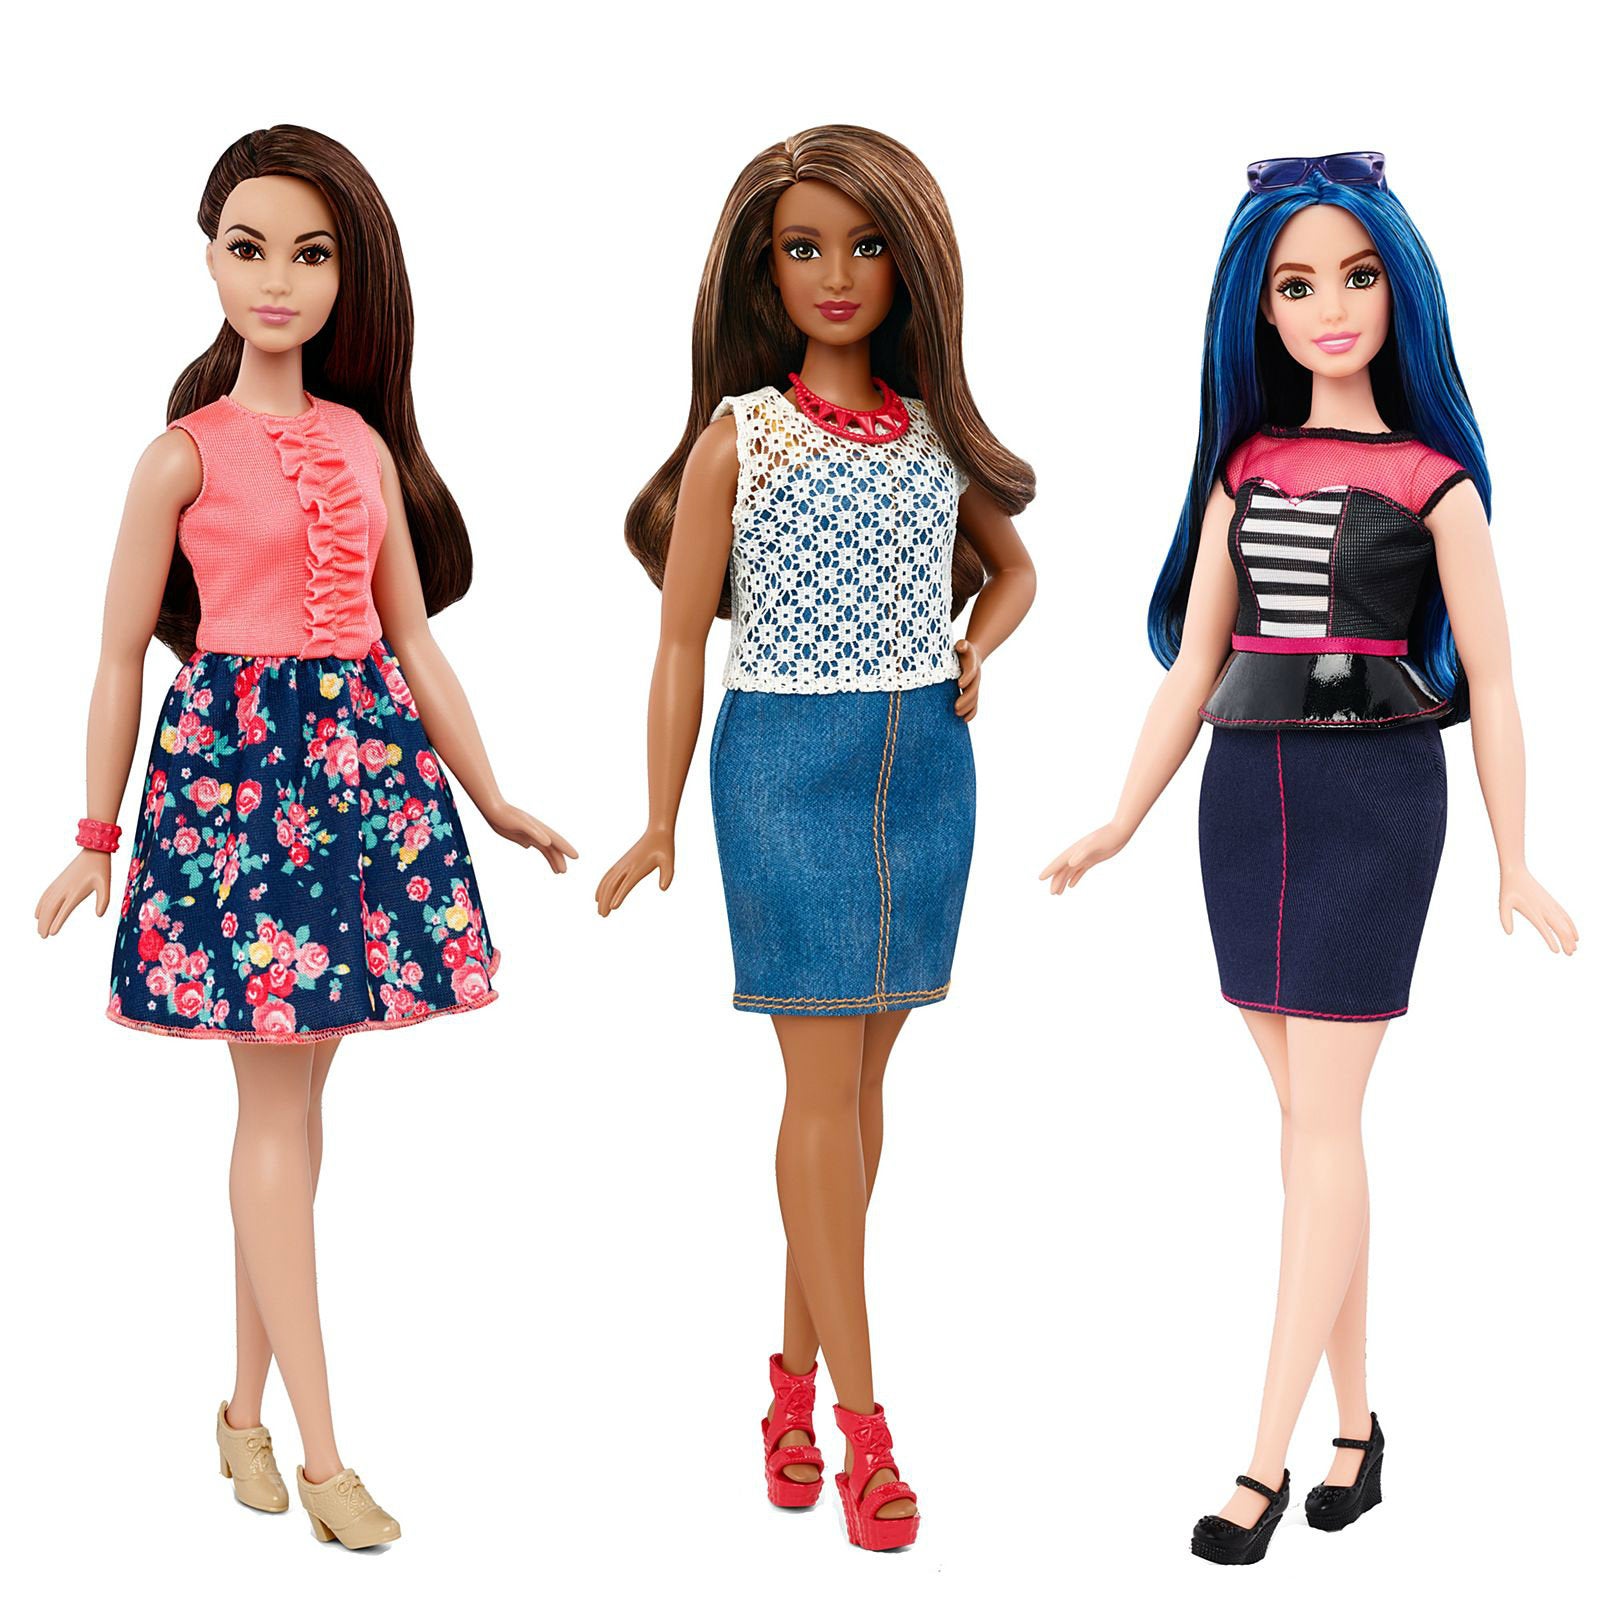 Mattel Introduces a New Line of Diverse Ken Dolls—Cornrows Included ...